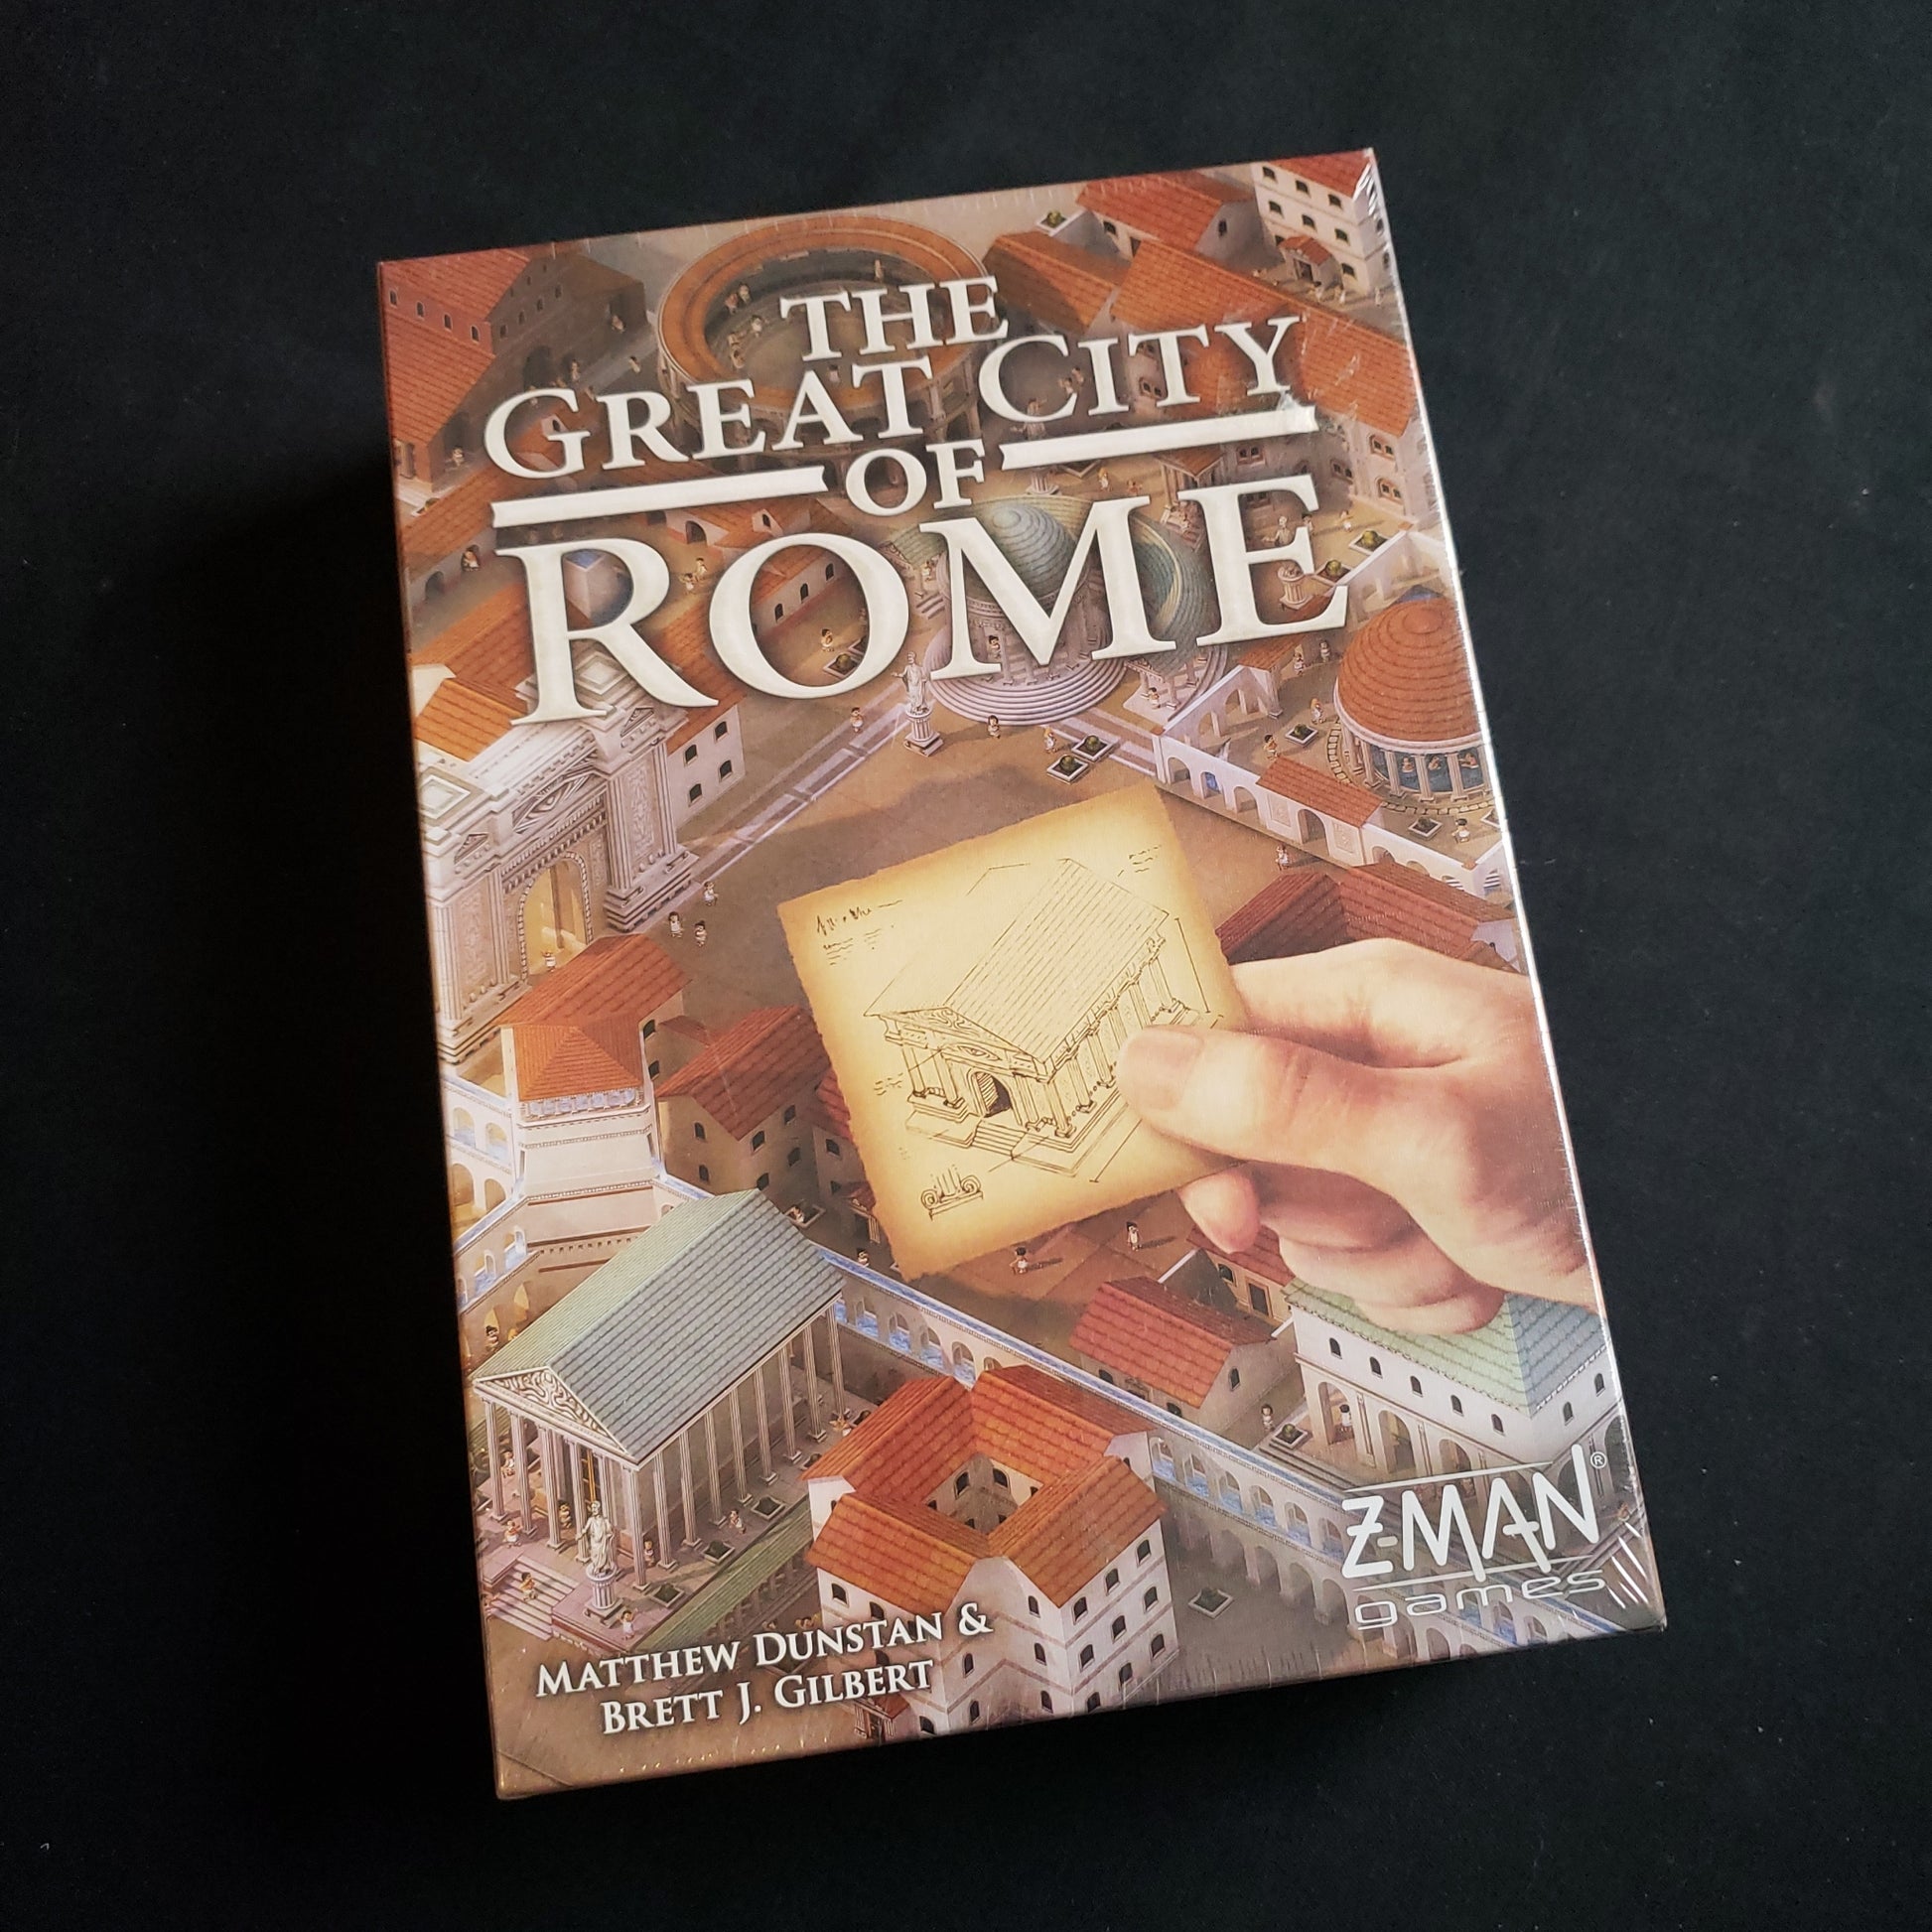 Image shows the front cover of the box of the Great City of Rome board game